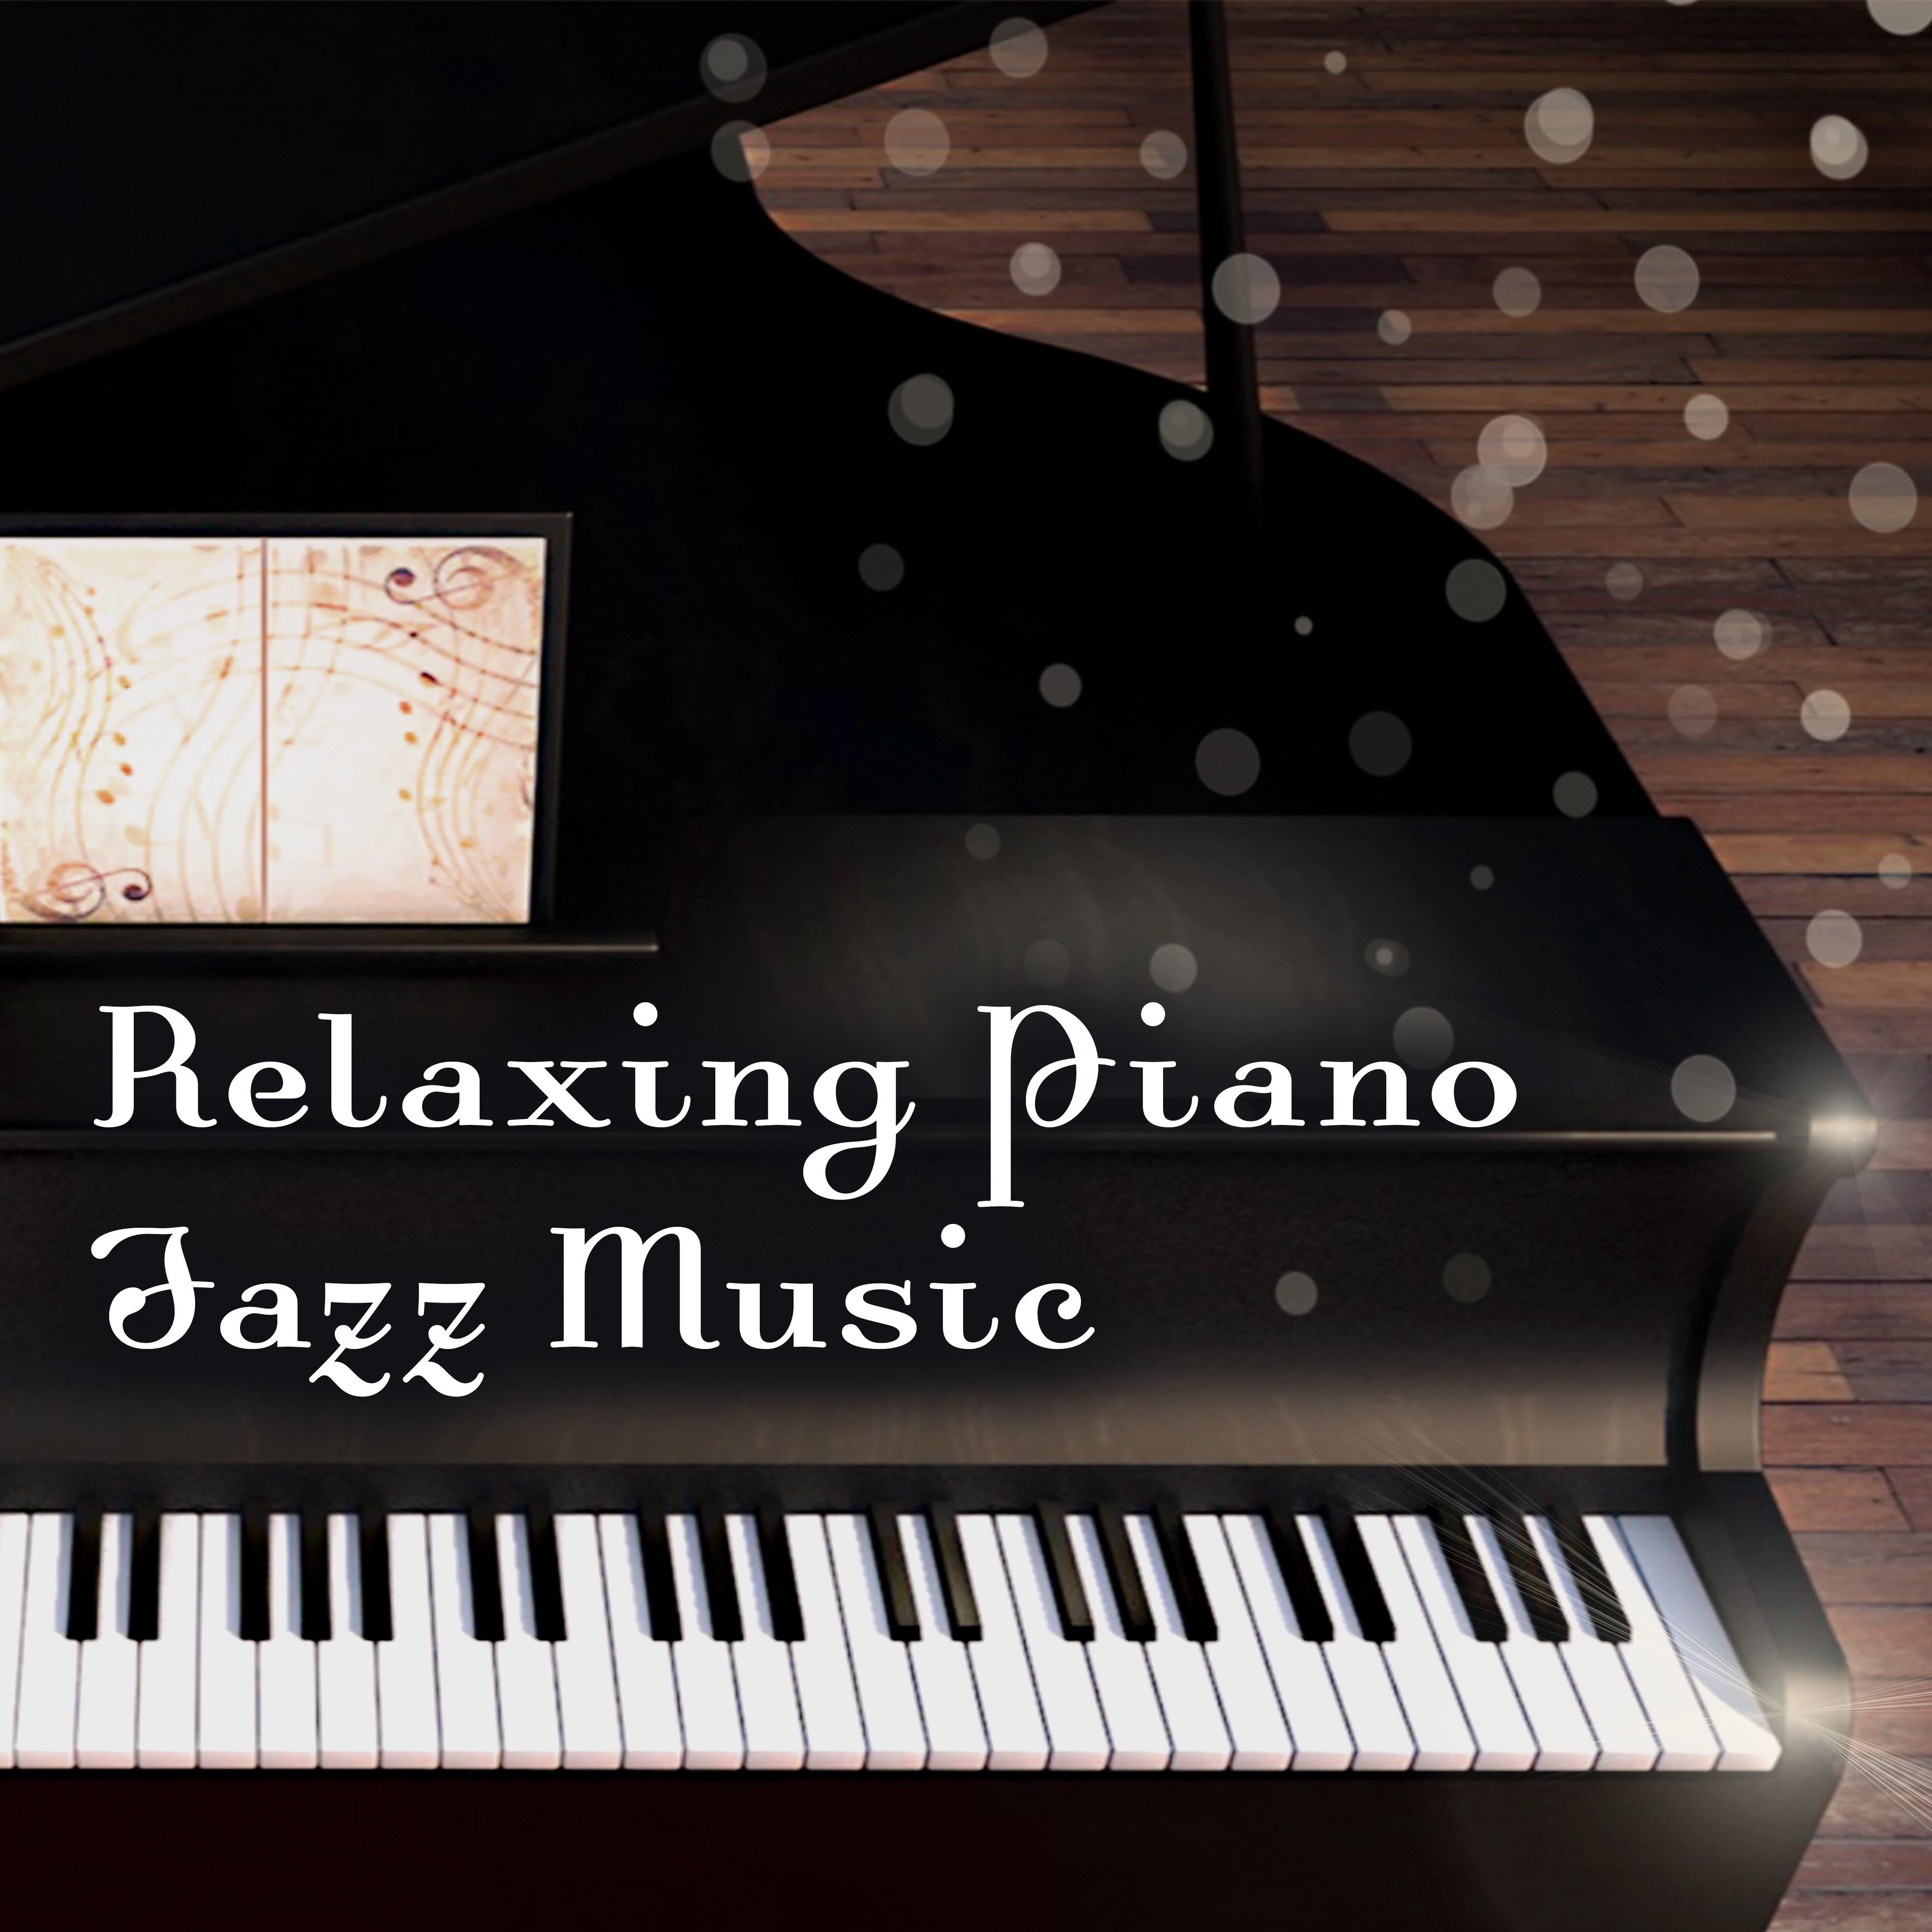 Relaxing Piano Jazz Music – Soft Sounds to Rest, Jazz Music to Relax, Moonlight Piano, Soothing Jazz